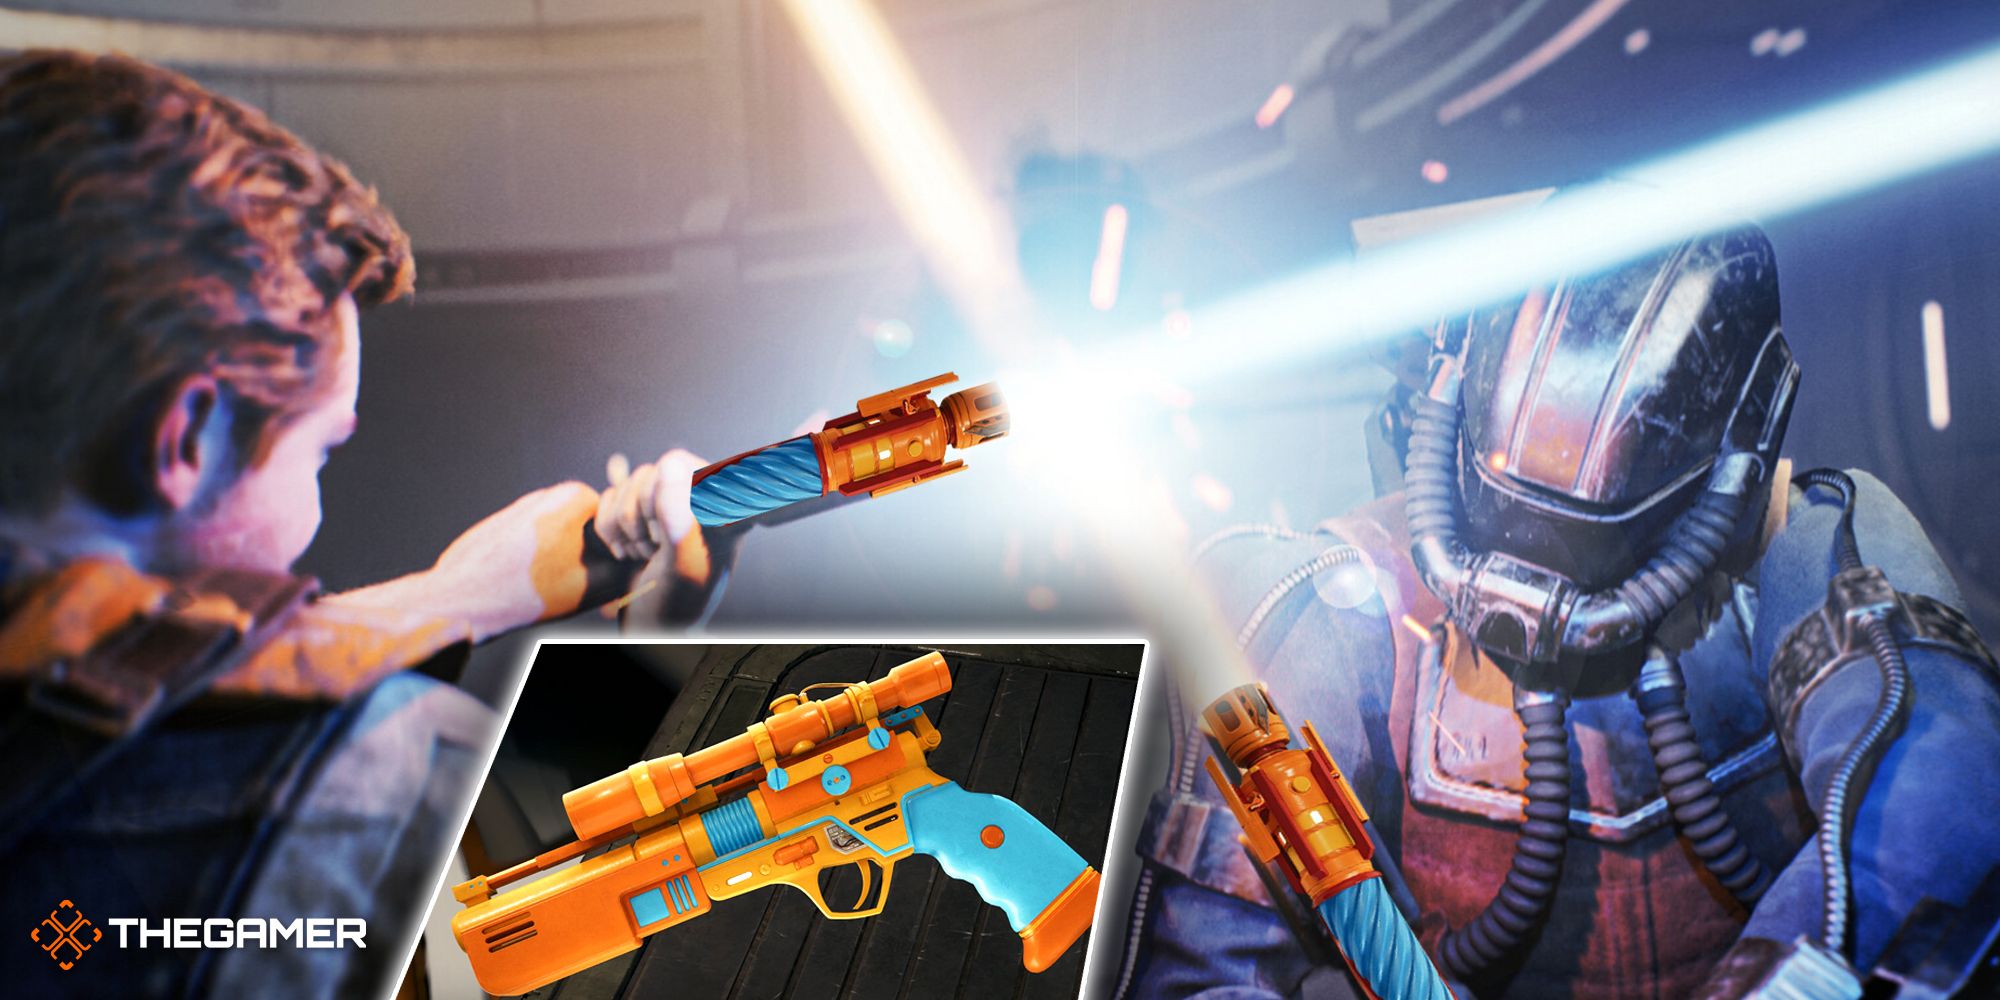 Star Wars Jedi: Survivor Players Are Turning Their Lightsabers Into Nerf Guns